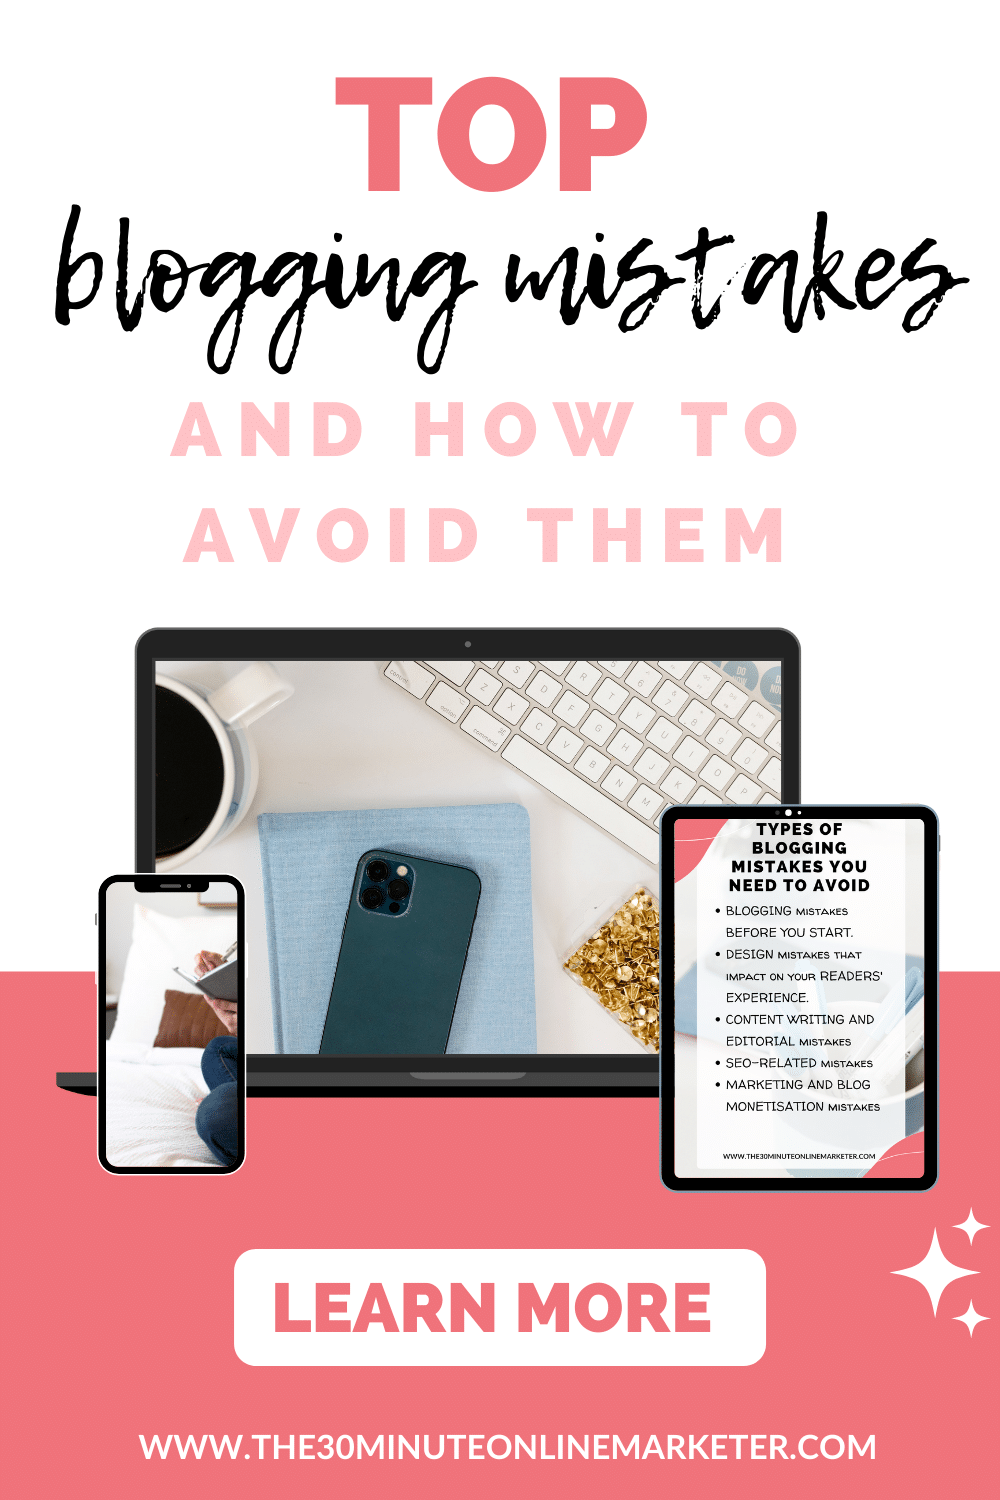 Top Blogging Mistakes And How To Avoid Them